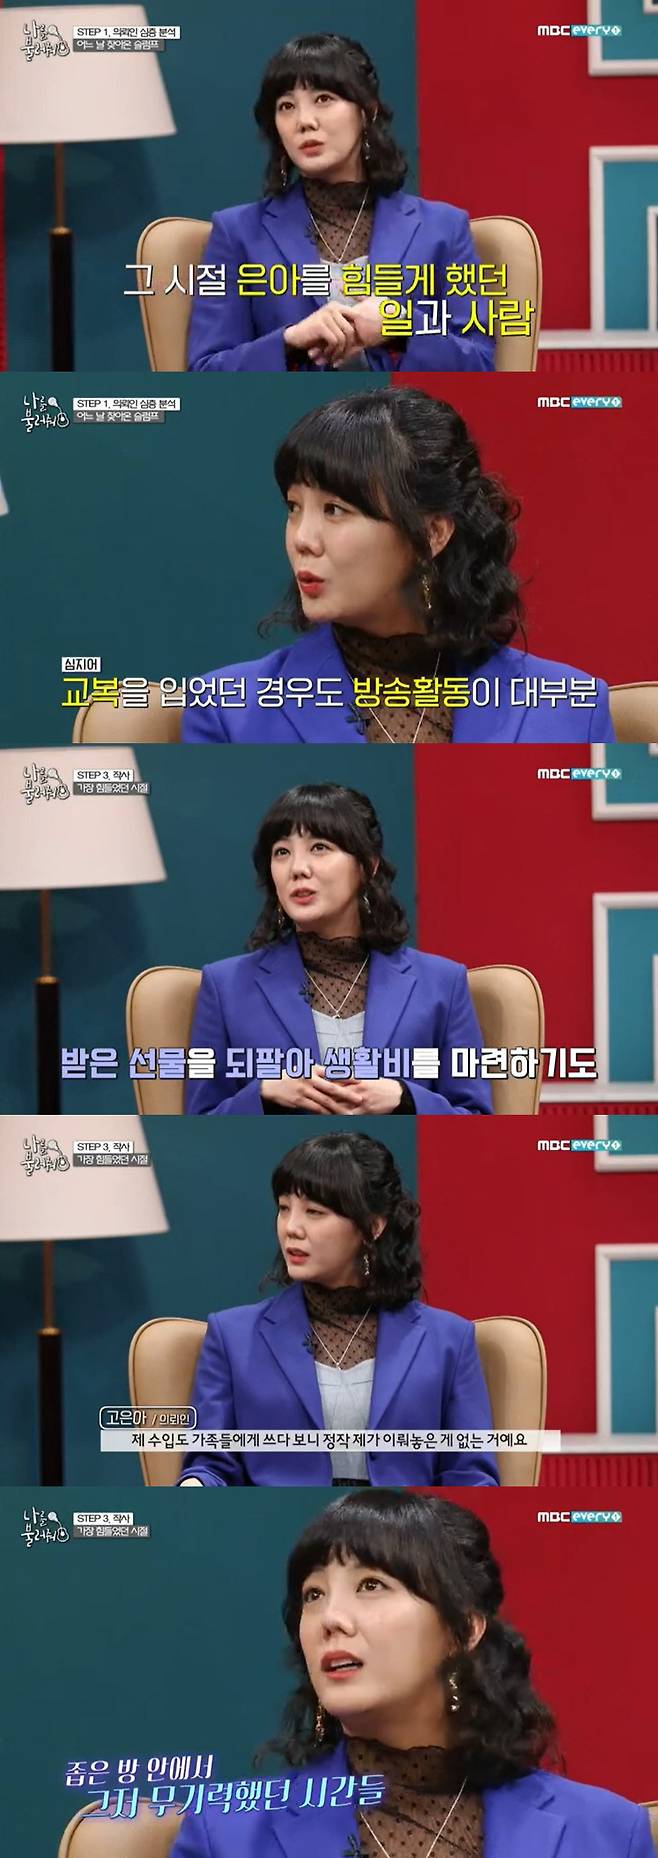 Call me: Go Eun-ah Confessions Life and the Family resentedOn the 7th MBC Everlon entertainment program Call Me, actor Go Eun-ah appeared as a guest and applied for Auto Song.Go Eun-ah, who was in his second prime, was 670,000 YouTubers. Go Eun-ah said, I was originally 680,000, but when I was Diet, the subscribers left.I feel a little disappointed, what should I do? sighed.It was Go Eun-ah, so hairy that even the hair transplant procedure was revealed through YouTube, Go Eun-ah said: My whole life wish was an all-back.But I had an M-shaped head, so About Her Brother Mir made it the first.About Her Brother was so invited that I was the best Choices in my life in 34 years.I am so satisfied now, he said, revealing the recent hair situation.As for the distribution of YouTube revenues with my sister and Mir, she said, I am distributed according to my active prize, but frankly, I am 6 out of 10 and I do the rest.Go Eun-ah, who is about to return to the actor in December with the short-form sitcom I want to live roughly, said Go Eun-ah about his role. Thankfully, the character was the same as that.I just Acted me. I dressed in my pajamas and Acted with a stranger. The theme of Go Eun-ahs A self-prelude was his slum; Go Eun-ah said on air that he would be confessing the first difficult times.Go Eun-ah, who made his debut at a young age, suffered slums as a worker, but it was also a worker who caused Go Eun-ah.Now Ive really got through a lot, Go Eun-ah said brightly.Go Eun-ah said of his slum, I left the job of entertainer and I wanted to have no people to be this age, no home, and nothing. The biggest thing was the economic part.If I had a Monthly Rent today, the next Monthly Rent seemed to be coming right up. I could not say that I was not Monthly Rent because I was independent from junior high school.My mother sometimes gave me 100,000 won, but it was a club line. I sold the Gifts I received, confessions of Life and Life that I had during the blank season.Go Eun-ah said, My income was not made because I wrote it to Family.I was living in One Room, but I was feeling embarrassed and I was looking at the ceiling because I wanted to see when this ceiling would collapse.Go Eun-ah said: Its a painful story but the Family called me a lot as they went around.I do not want to get it, he said, saying that the Family was worried about his extreme Choices.In particular, Mir called Moy Yat and said that he confirmed Go Eun-ahs regards. Moy Yat said, Is your sister watching the ceiling again?At one point, I told Mir about the hard story, so I reached out to share YouTube. On YouTube, a warm family was outstanding, but in fact, Go Eun-ah turned his back on Family.Go Eun-ah said: I wasnt on good terms with Family, I was resentful when the money I earned went to Family.It was Family that I finally grabbed my hand when I was not looking at it. Go Eun-ah, who decided to retire himself, refused to make a new offer after declaring his retirement after completing his contract with his agency. Go Eun-ah said, There is nothing I can do.I think its too late to learn something, so my mental collapsed, so About Her Brother said, You can come on my channel and say whatever you want to do.I did not have to do Diet and I wanted to live as I am. It was Mirs full confidence that brought Go Eun-ah back to life: Mir said he could still admire me, saying that the role model was me.Even now, when I shoot, I say, Our artist is working hard today. The song with the slum of Go Eun-ah was sung by the Ladys Code. Go Eun-ah, who listened to the song quietly, poured tears.After listening to the song, Go Eun-ah said, I was so grateful that I heard every single lyrics, and then I thought it was over.I wanted to be okay tomorrow. I kept thinking about it. 